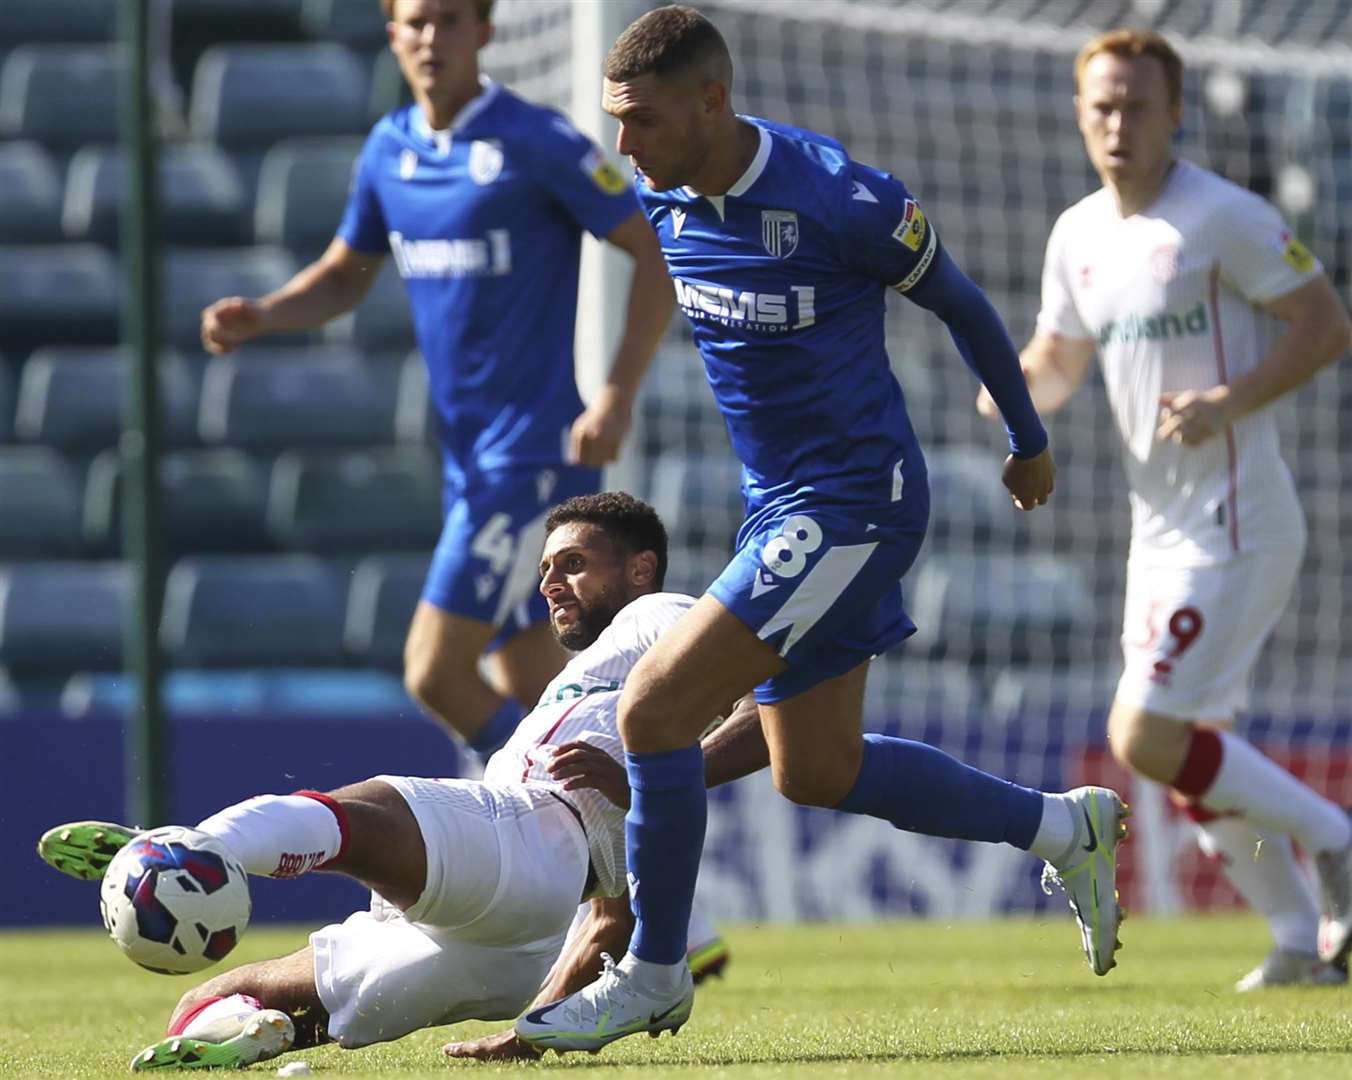 Gillingham skipper Stuart O'Keefe battles for the ball in the goalless draw on Saturday with Walsall. Picture: KPI